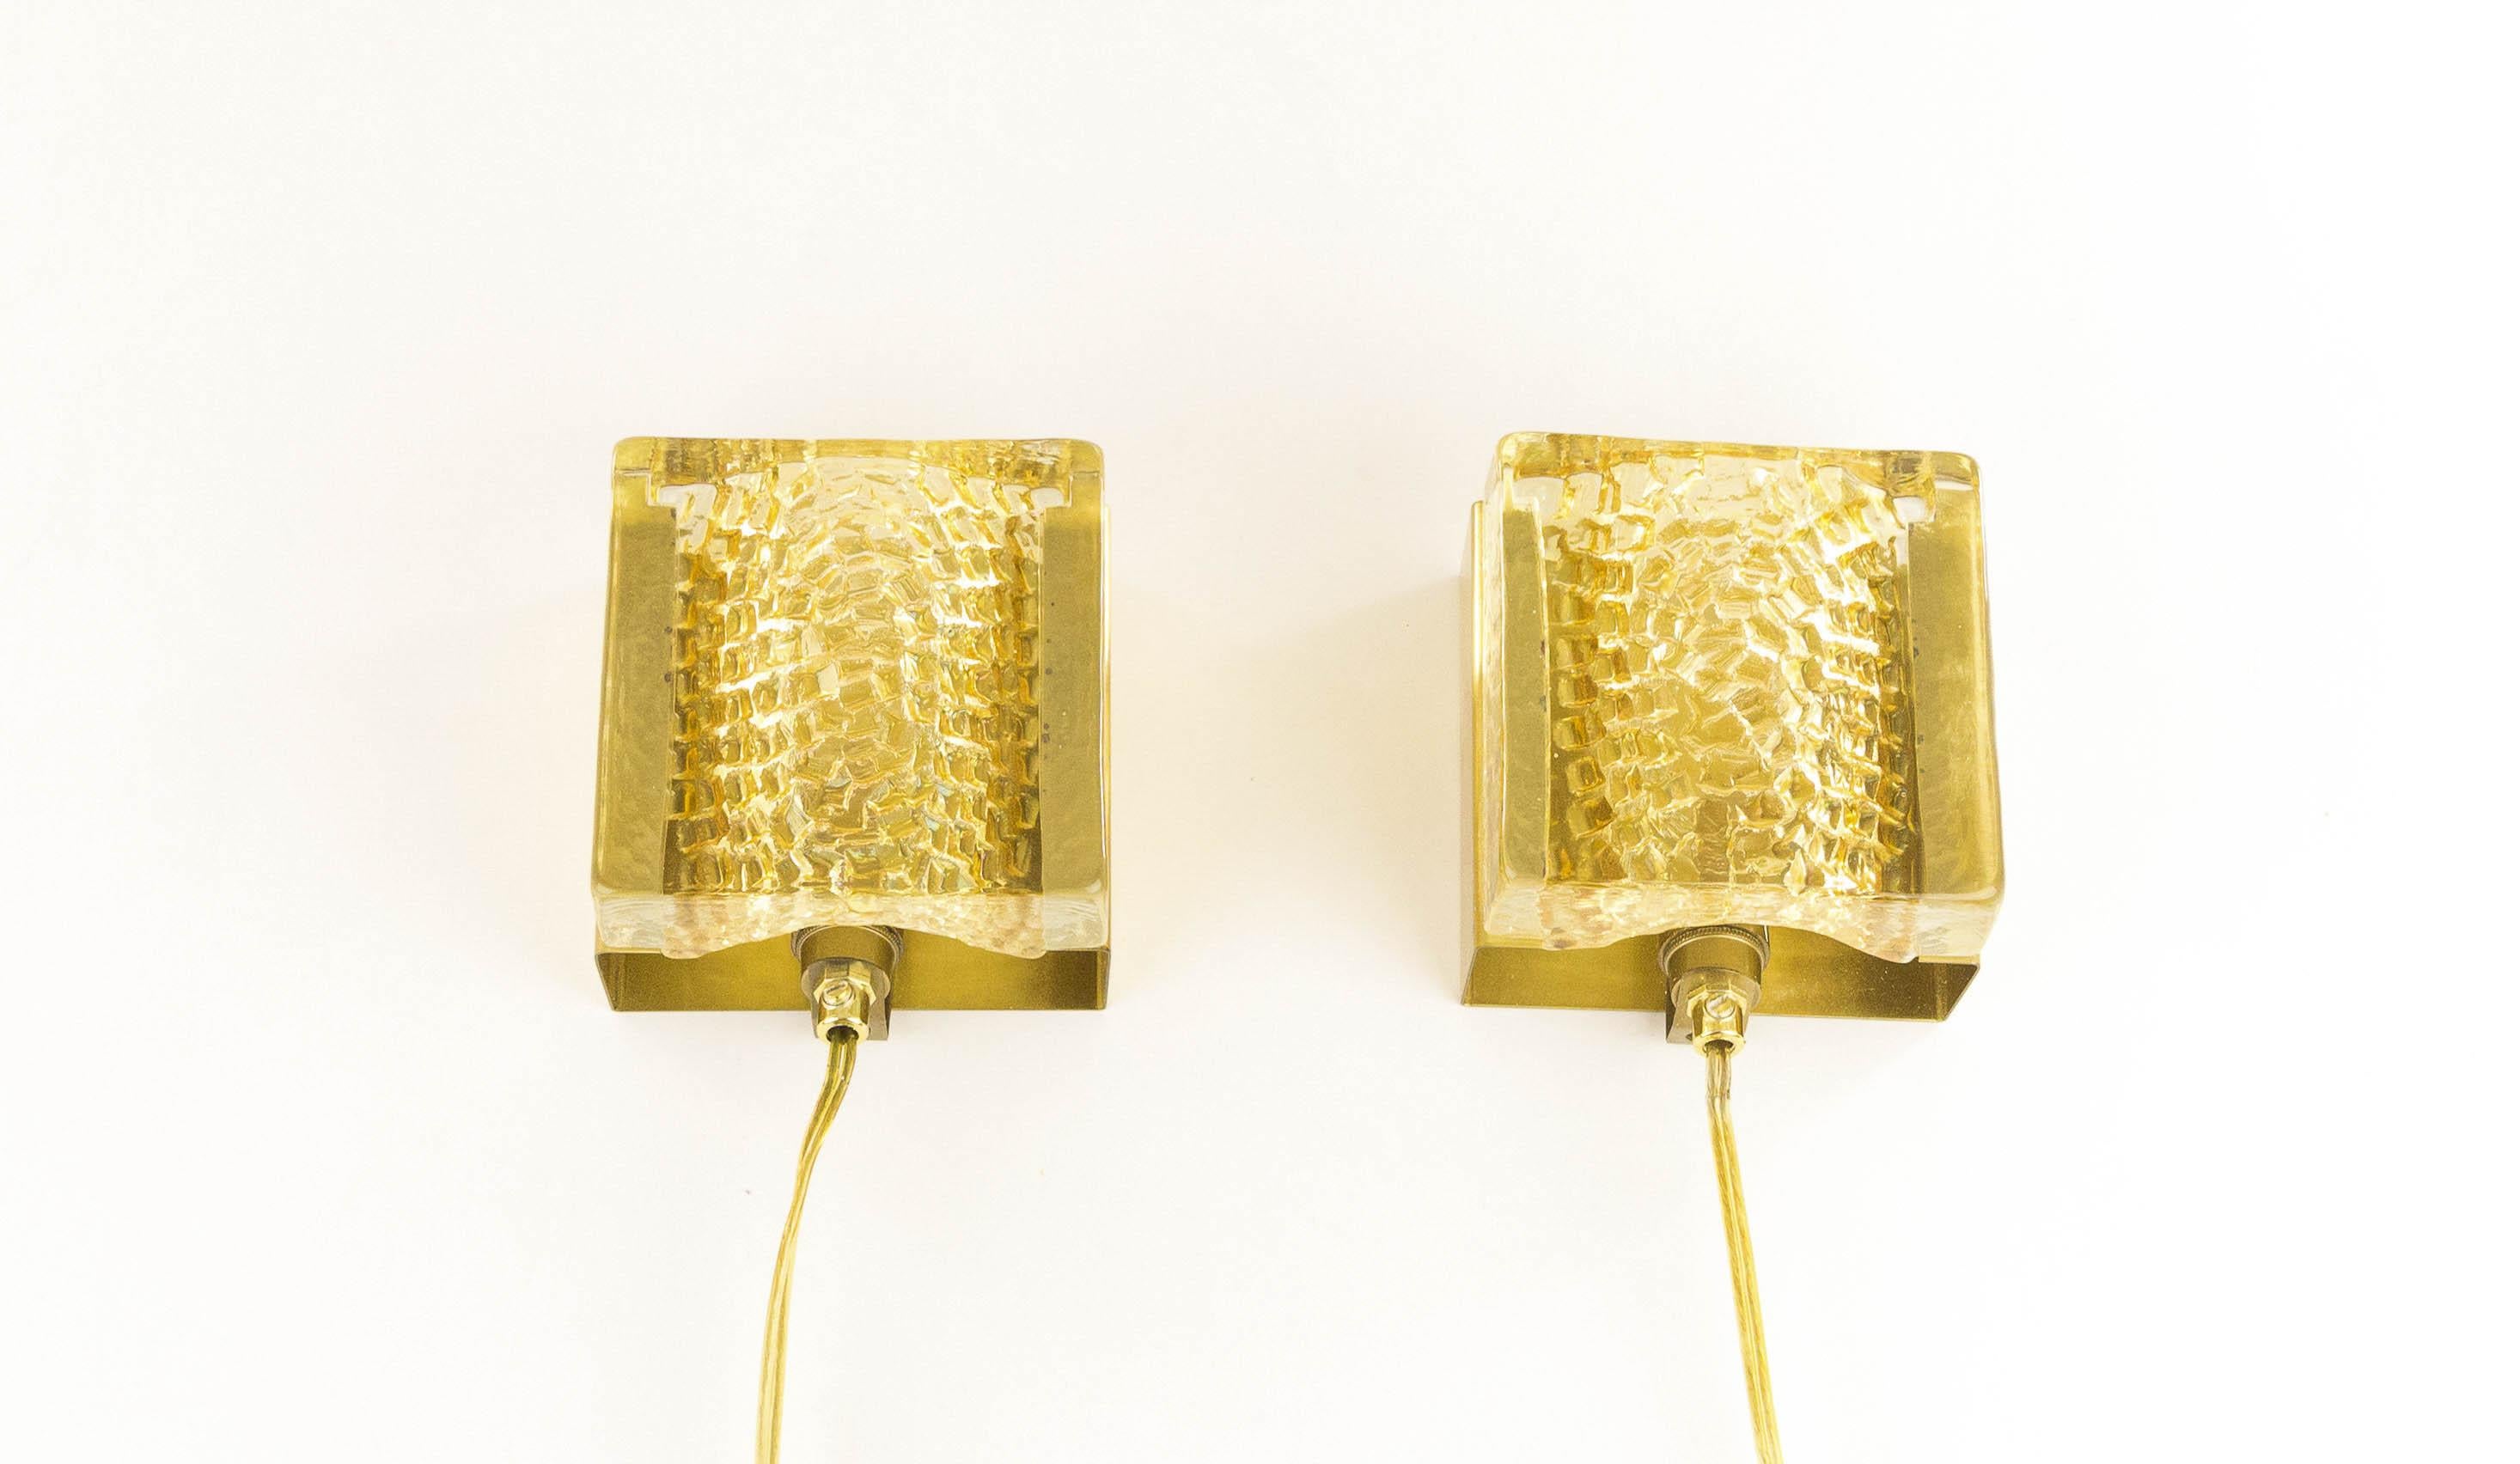 Scandinavian Modern Pair of Kalmar glass and brass Wall lamps in gold by Vitrika, 1970s For Sale